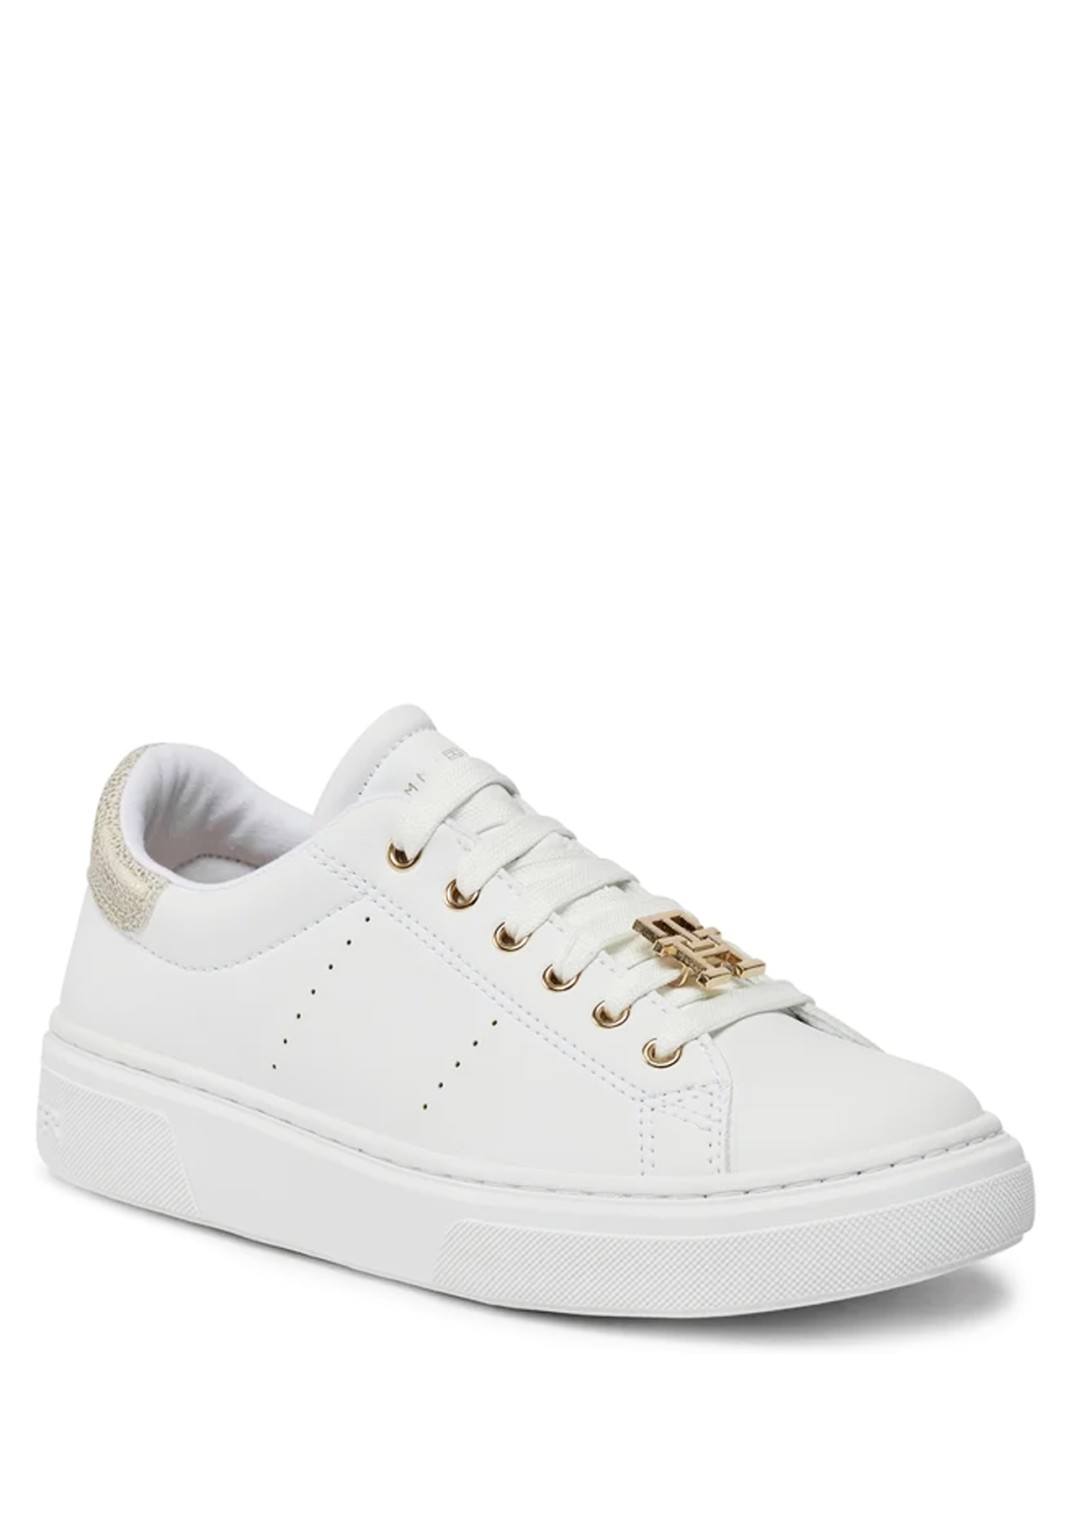 TOMMY HILFIGER - Sneakers Allacciata - Donna - T3A9 - 33207